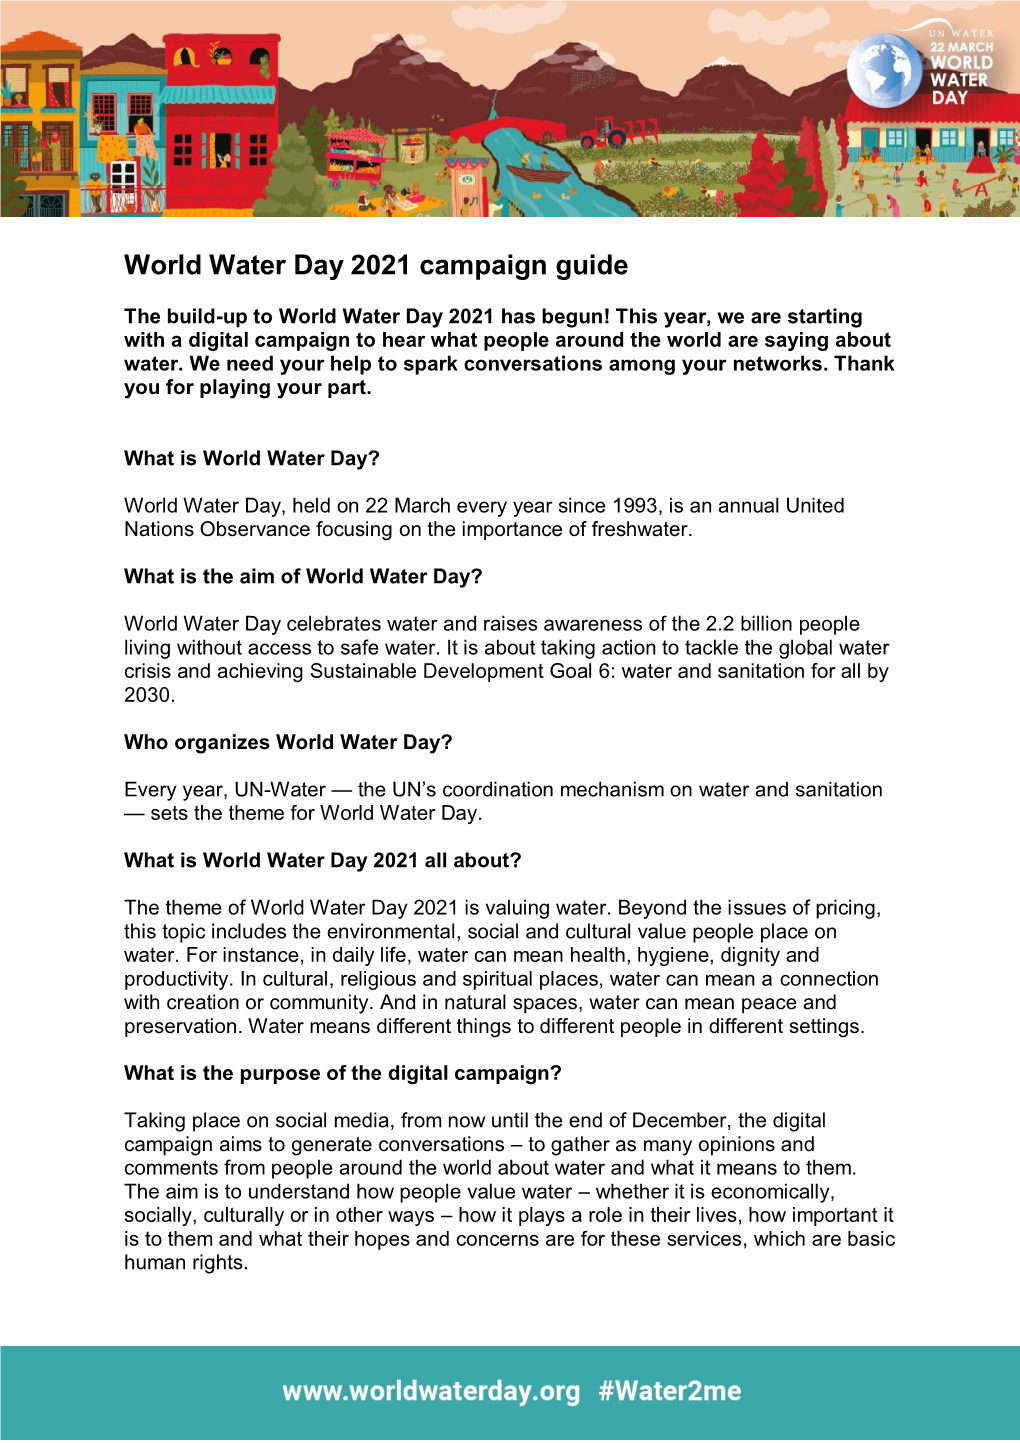 World Water Day 2021 Campaign Guide